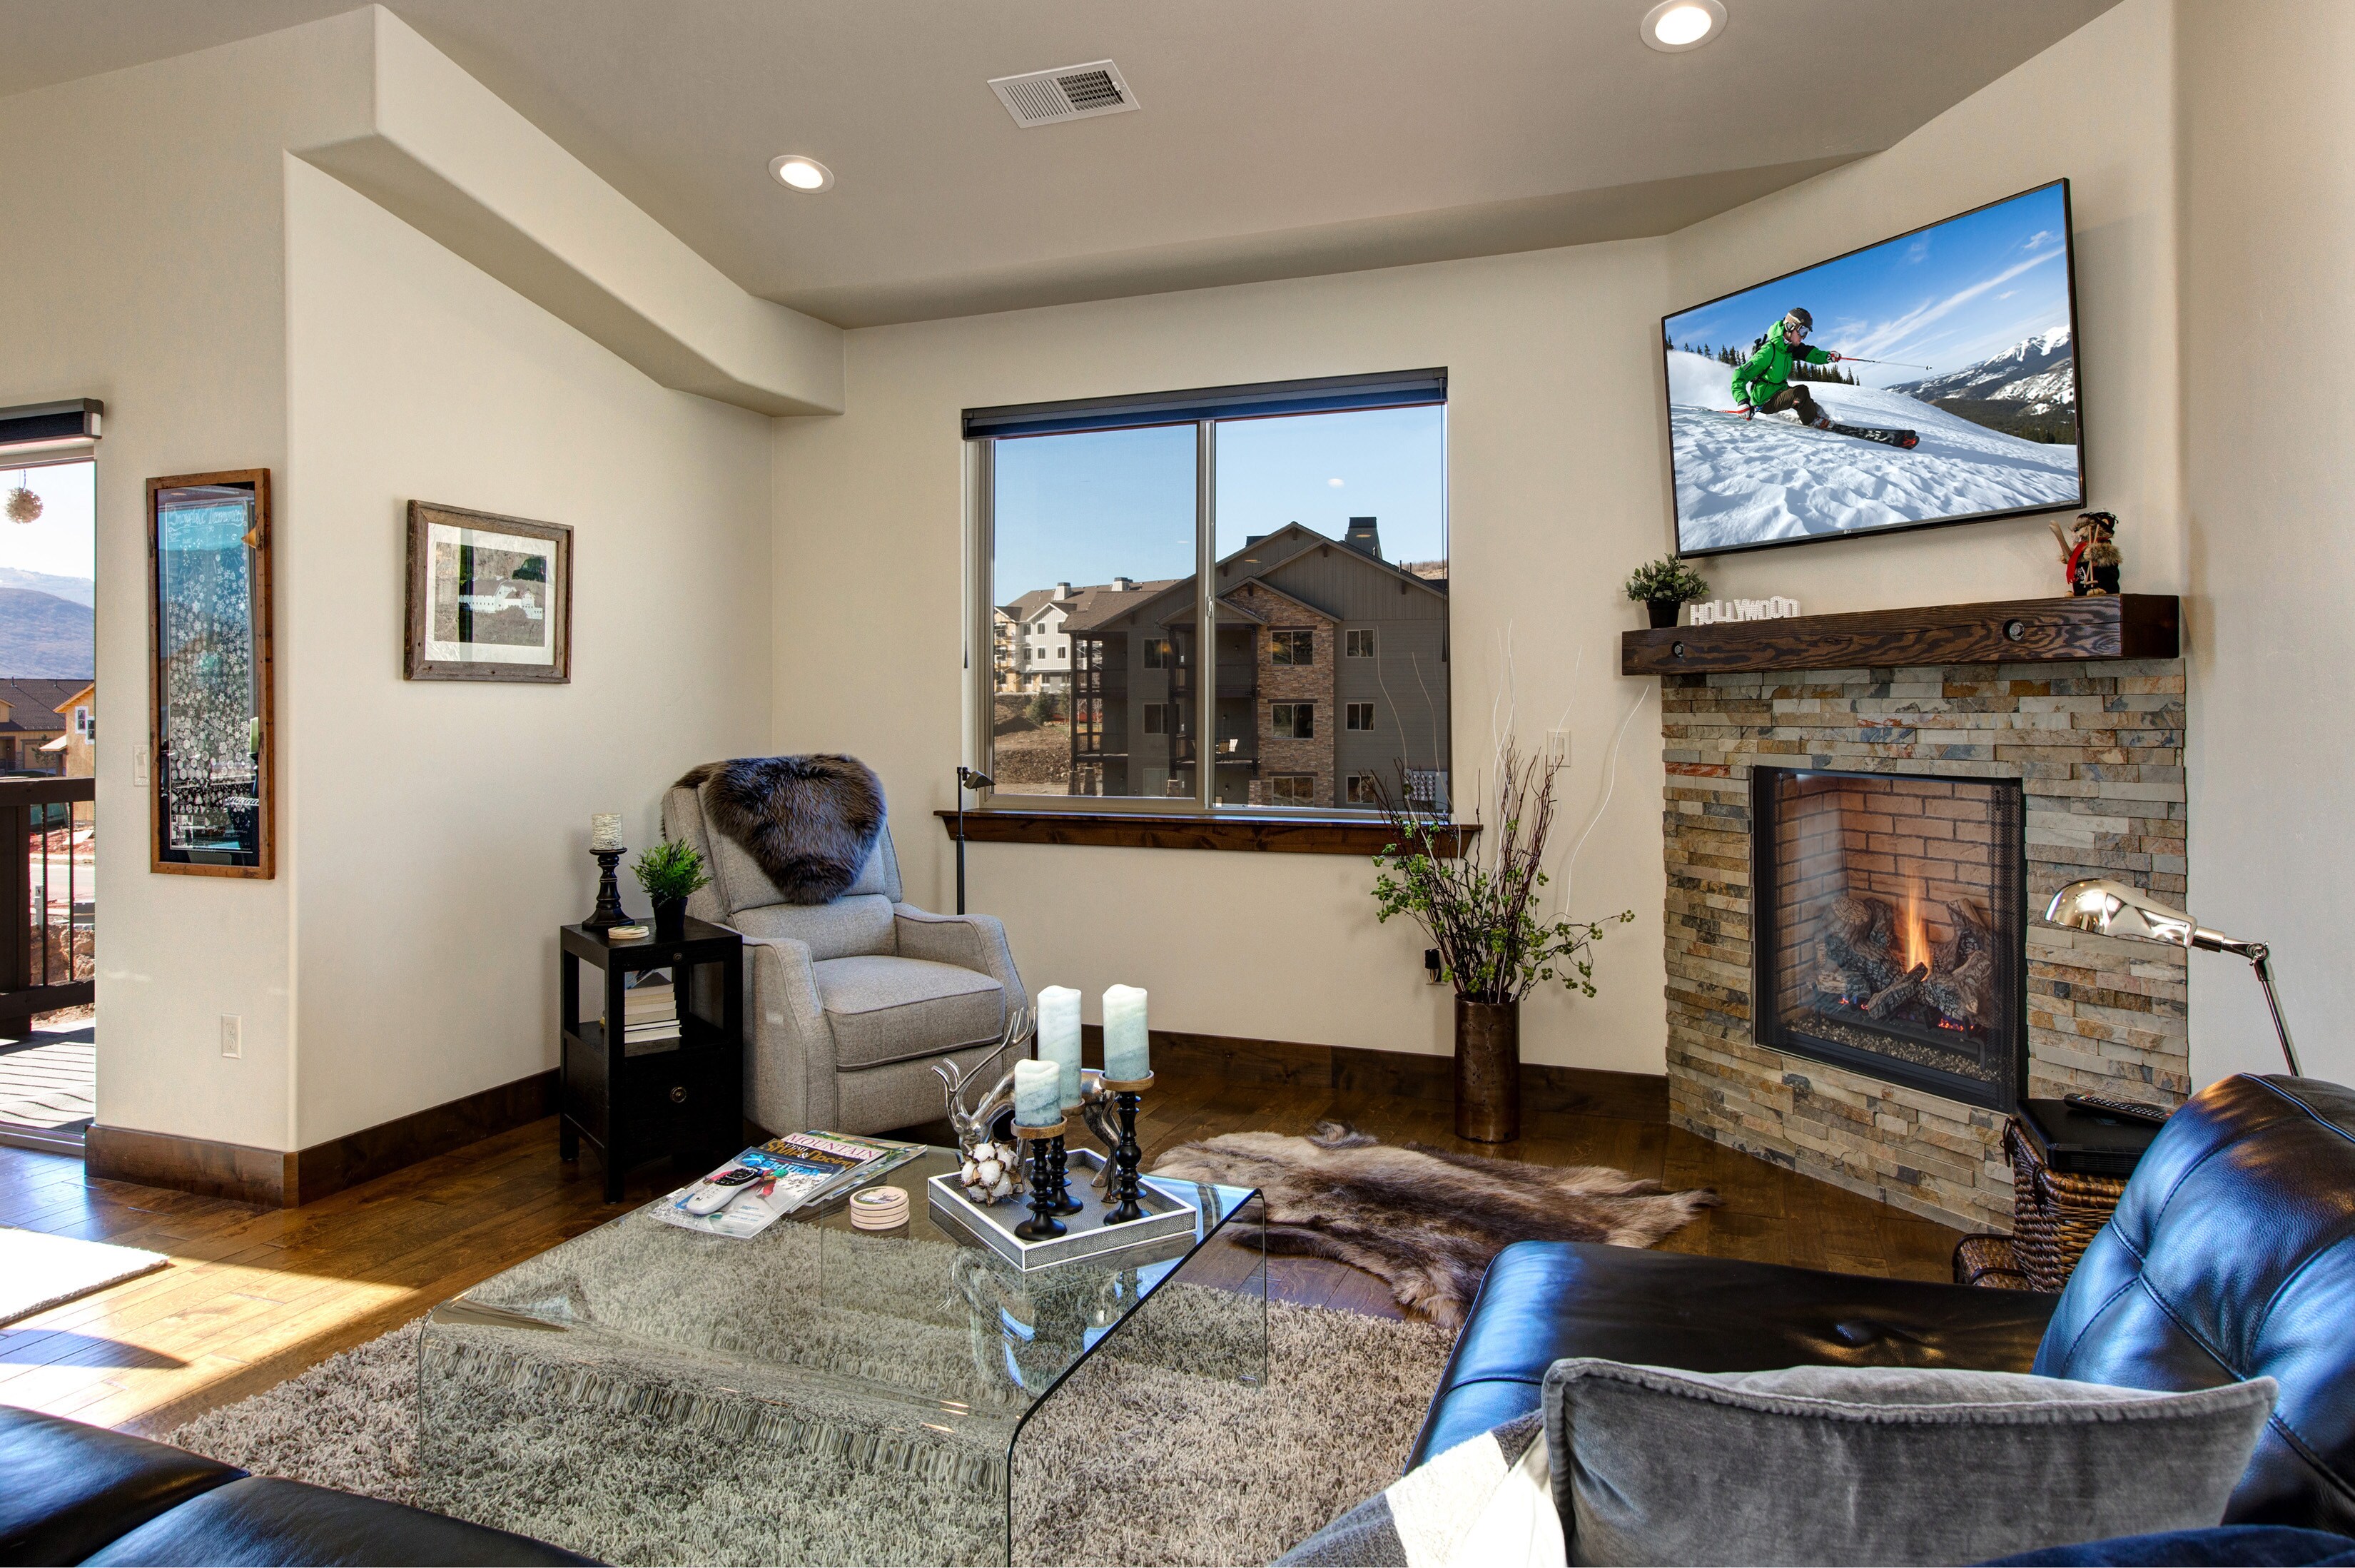 Warm up by the fireplace and watch your favorite movies or shows.